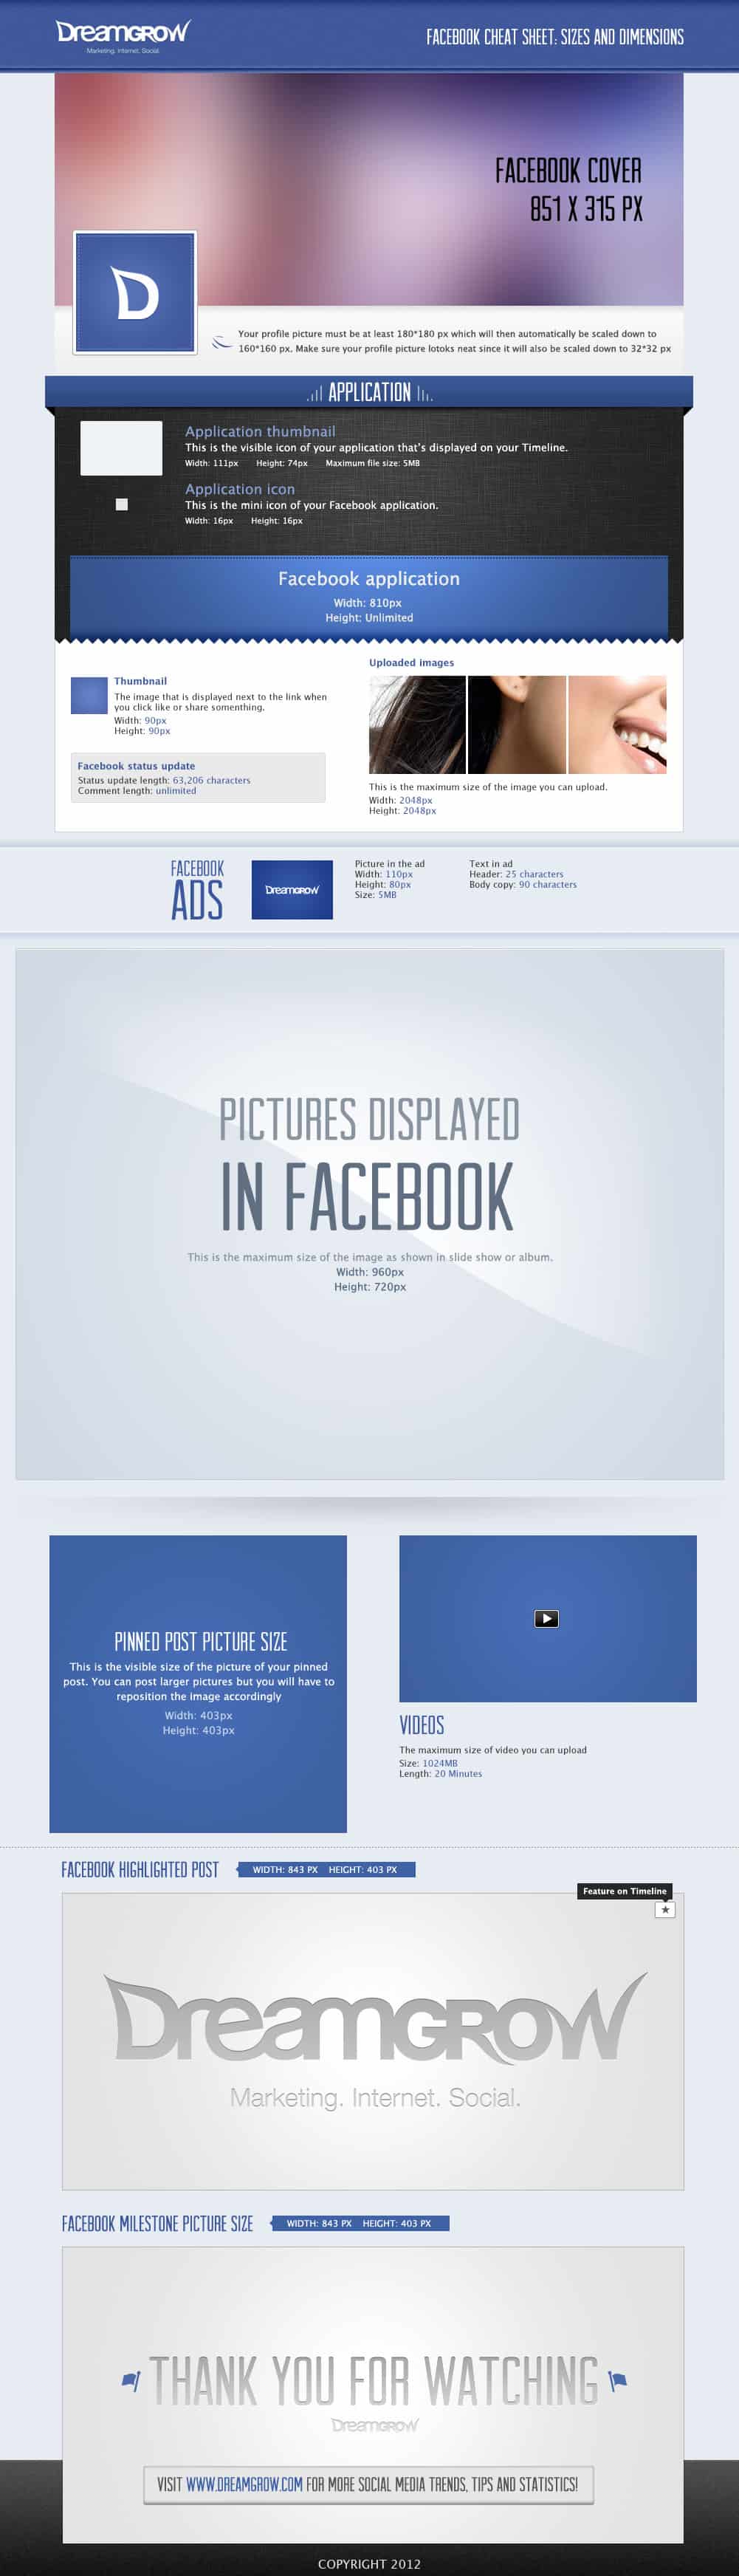 facebook profile picture size. What is the size of the profile picture in Facebook?